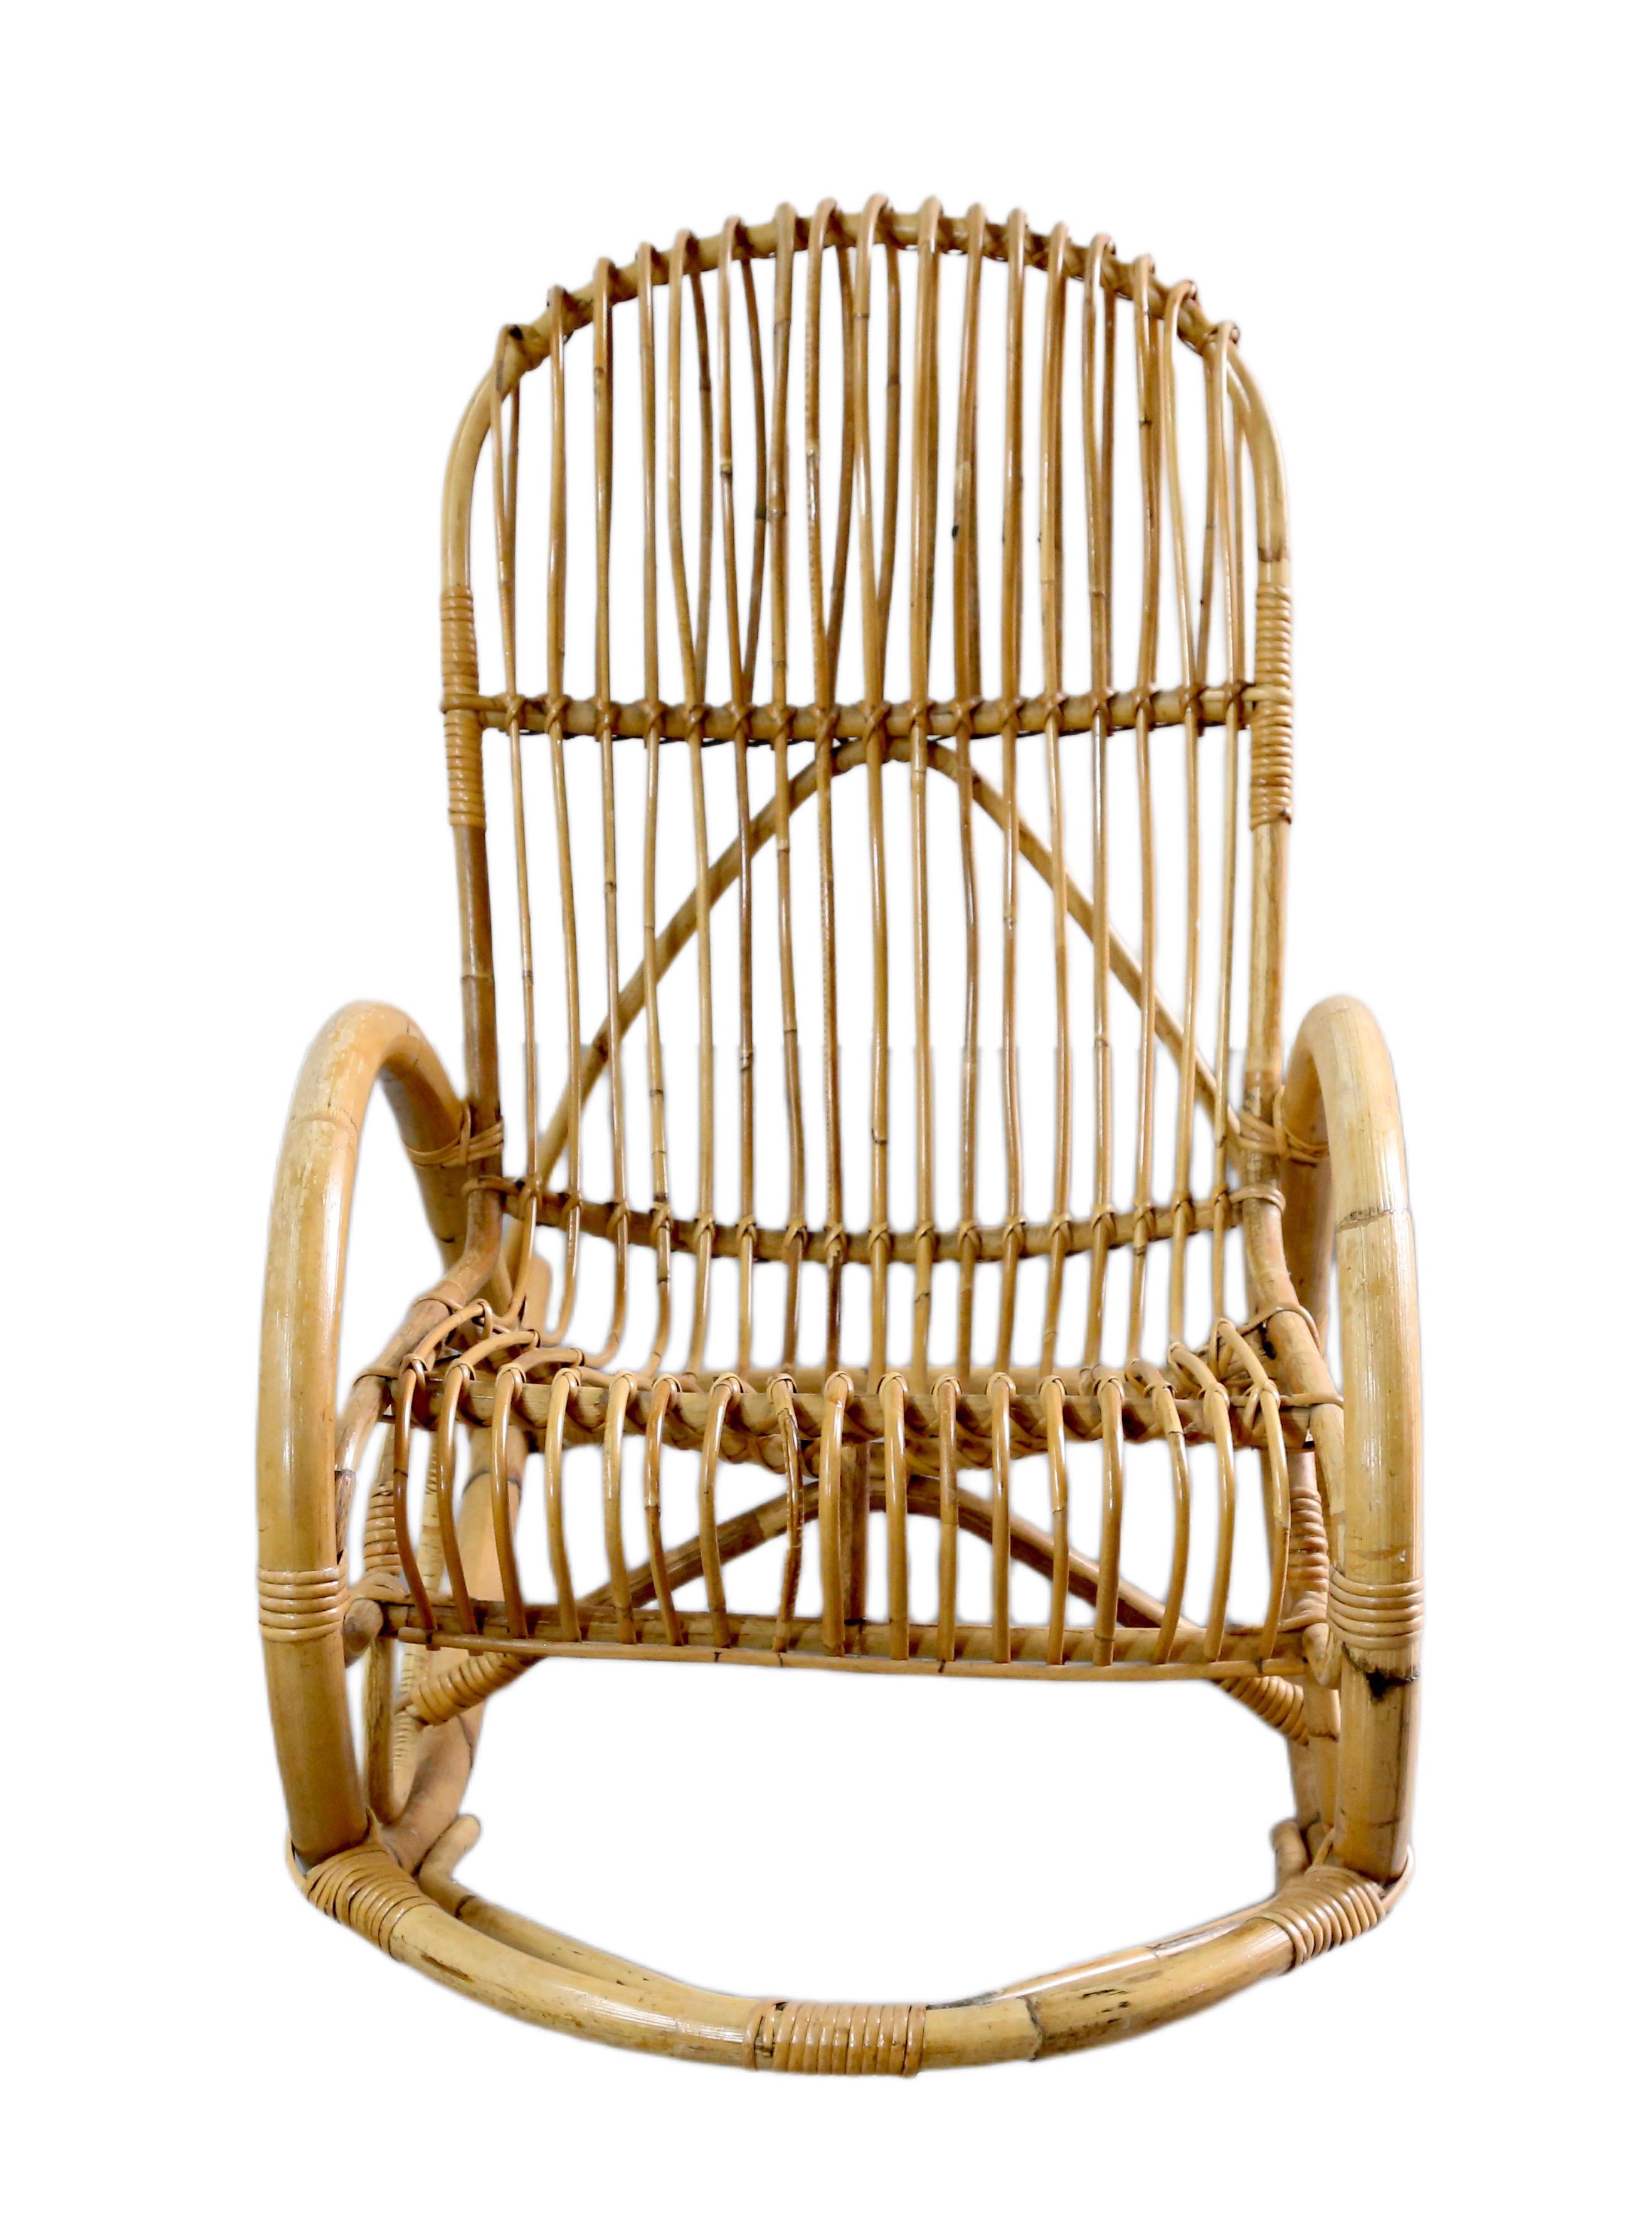 British Boho Style Bamboo Wicker Rocking Chair By Dirk Van Sliedregt For Rohe Noordwolde For Sale